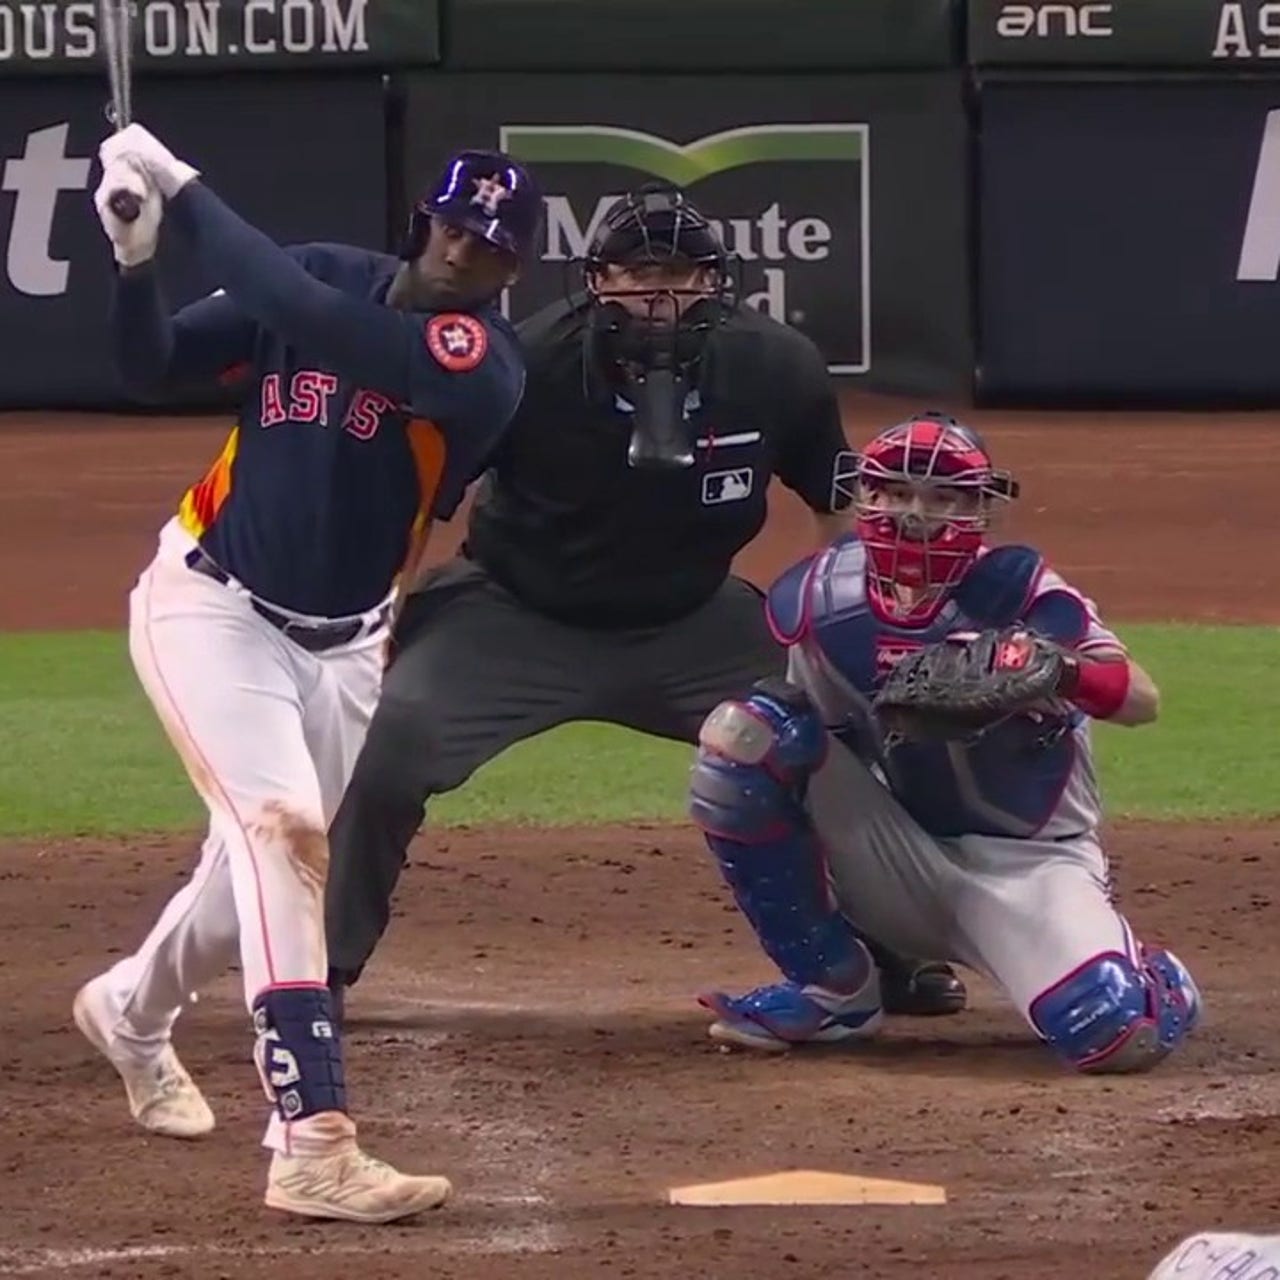 Yordan Álvarez smashes his SECOND home run of the game to cut Astros'  deficit against Rangers